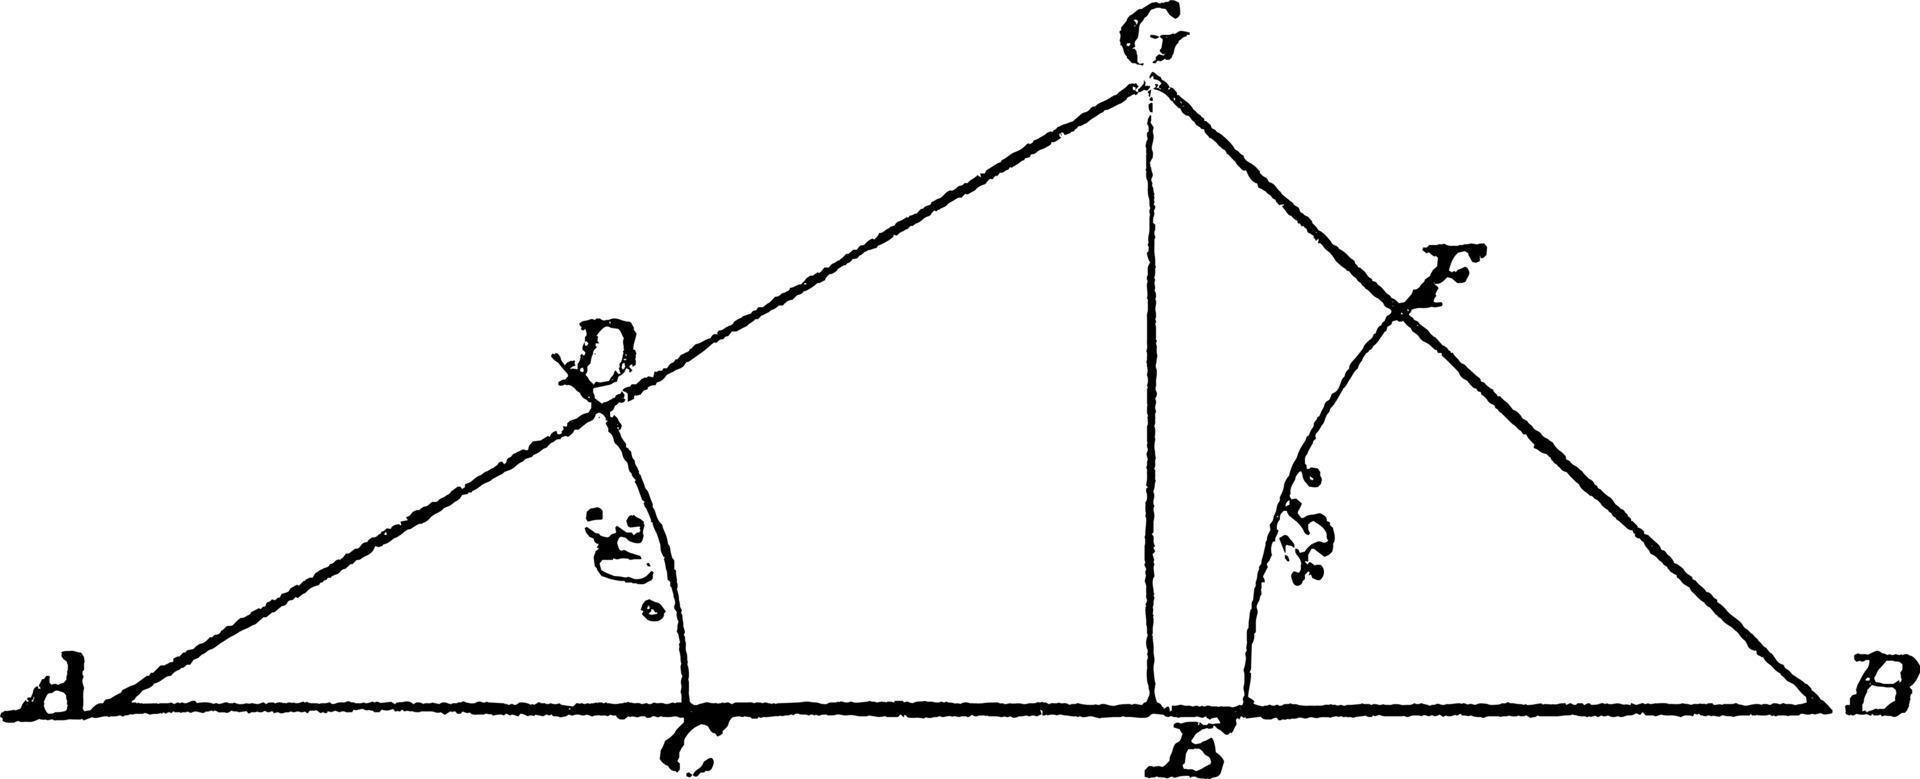 Construction of Triangle Given Angles and Base, vintage illustration. vector